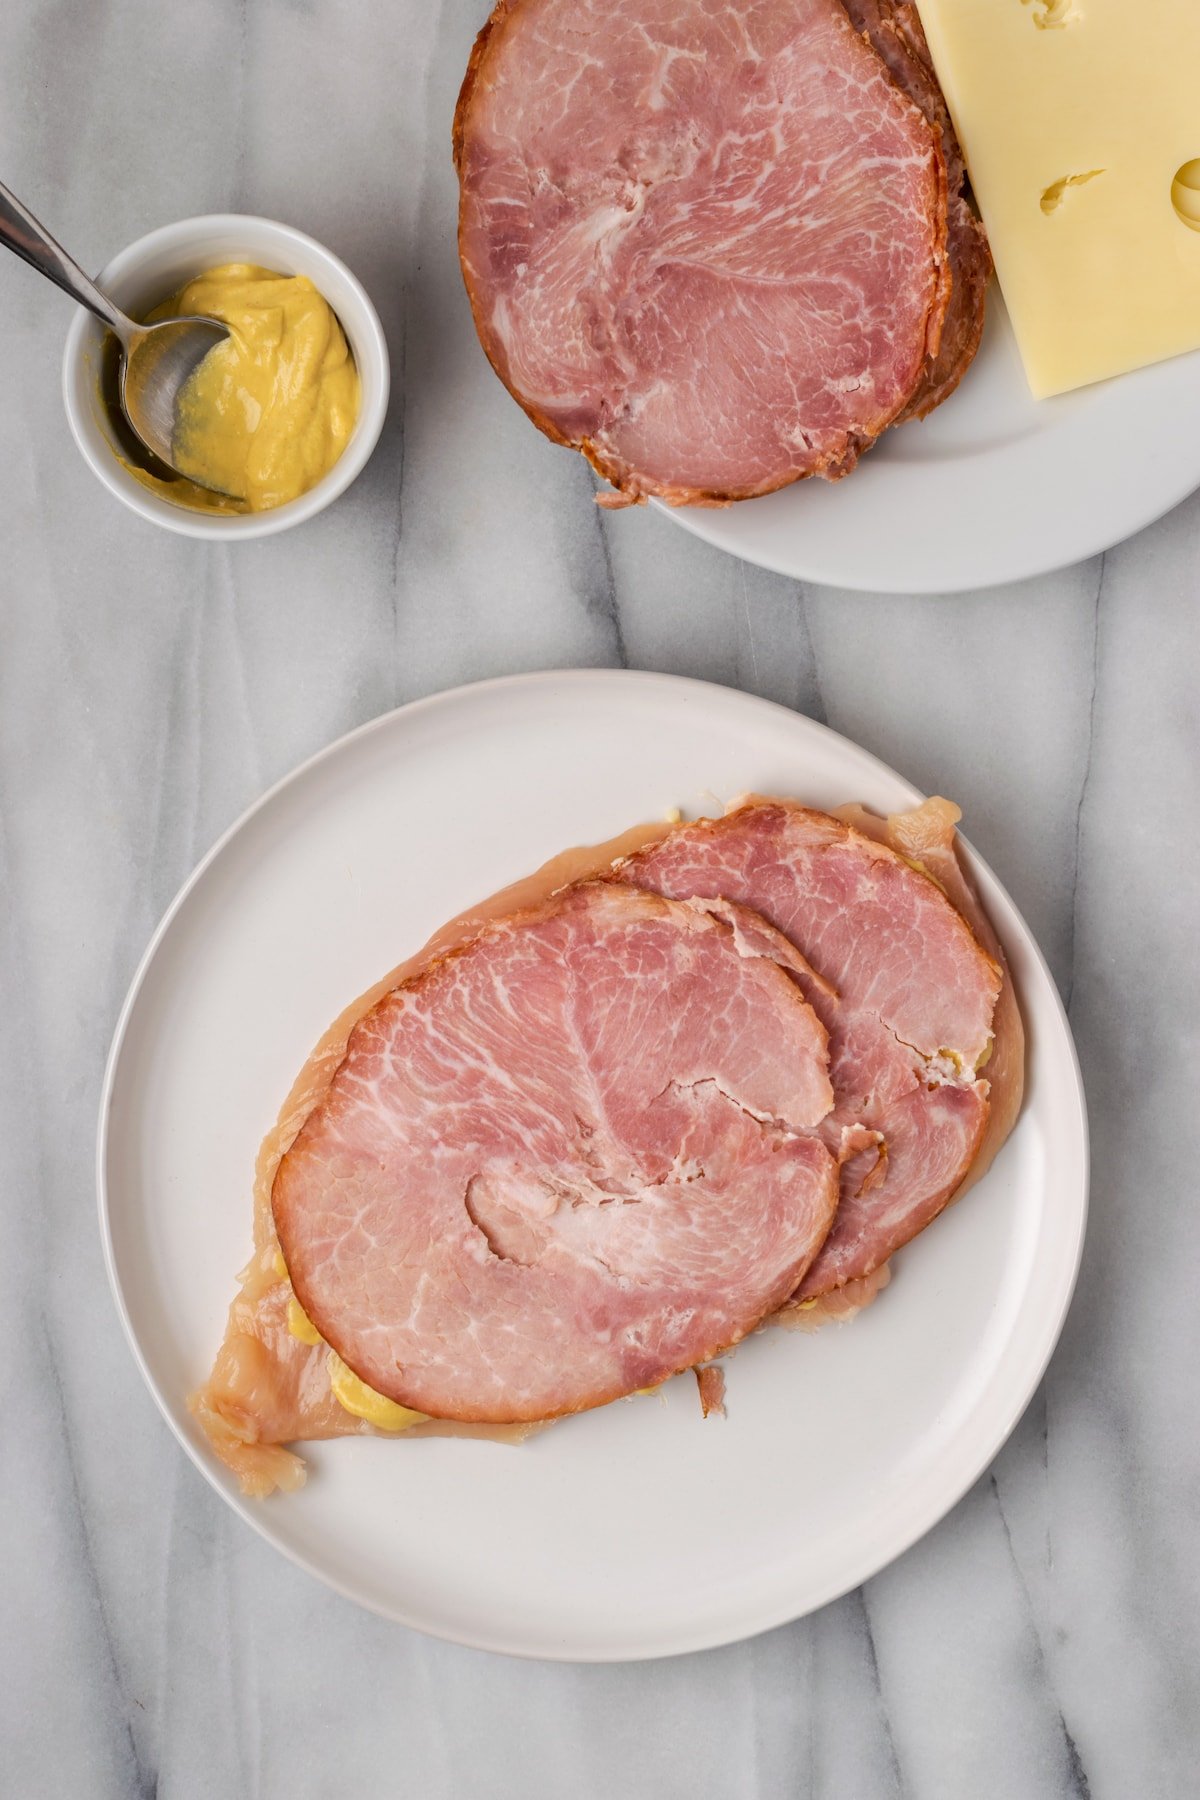 Overhead view of two ham slices on top of a chicken breast on a plate, next to a plate of ham and cheese and a ramekin of tmustard